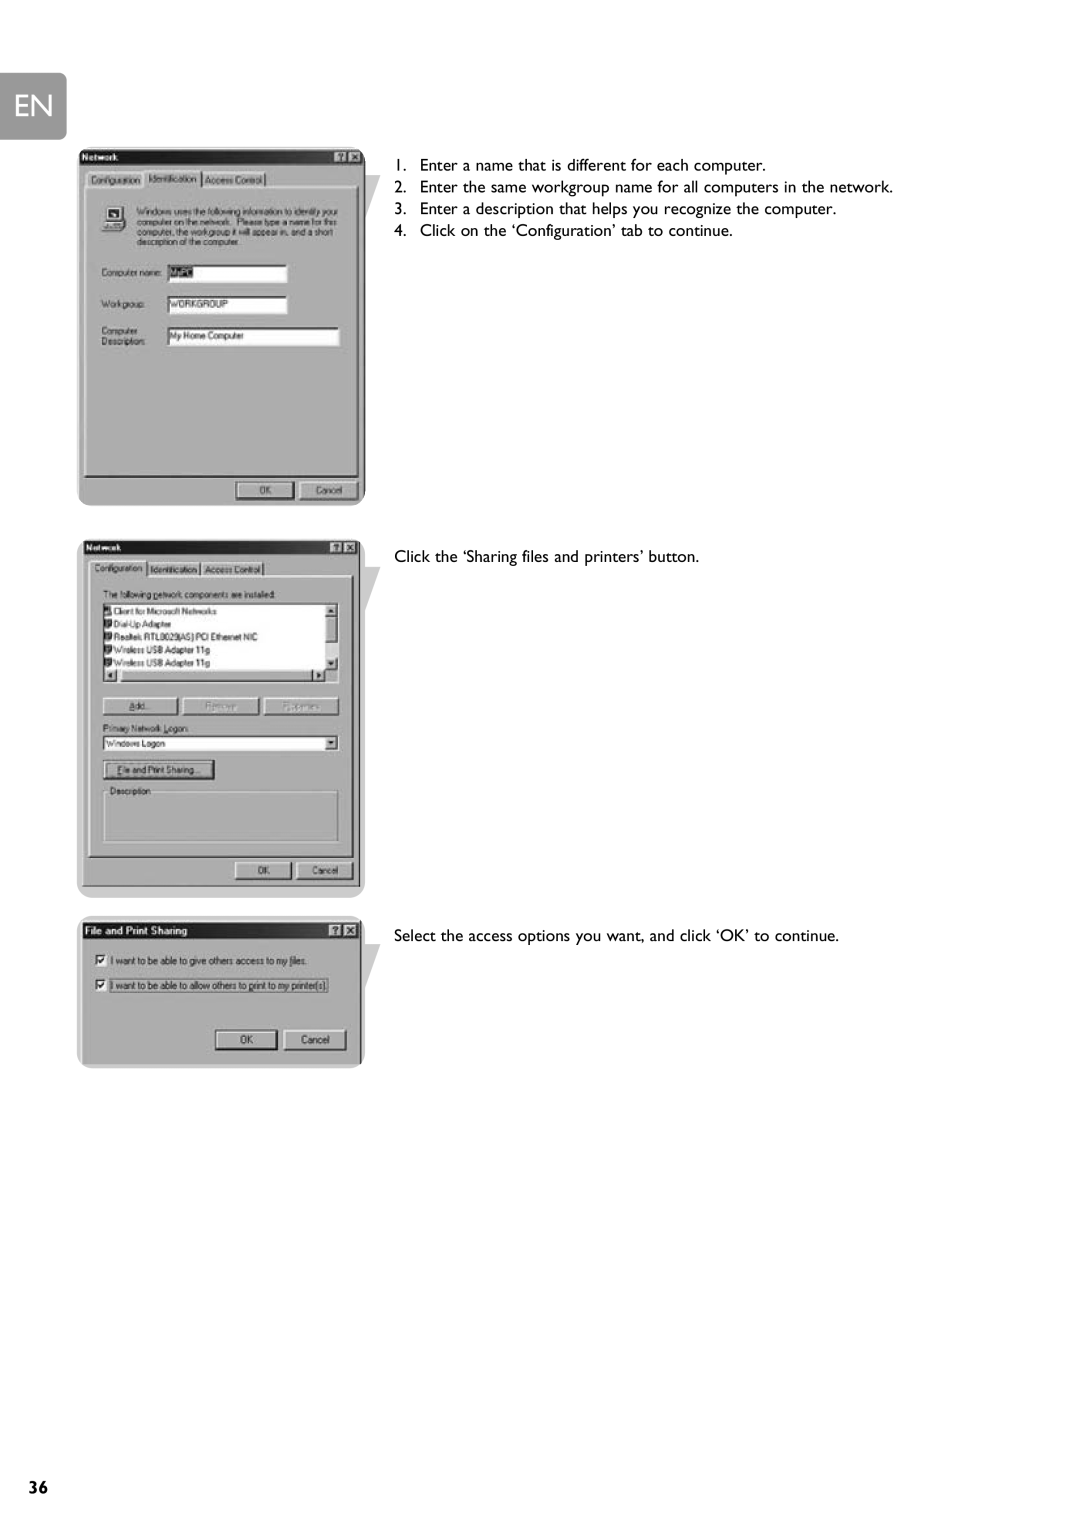 Philips SNA6640 user manual Click on the ‘Configuration’ tab to continue, Click the ‘Sharing files and printers’ button 